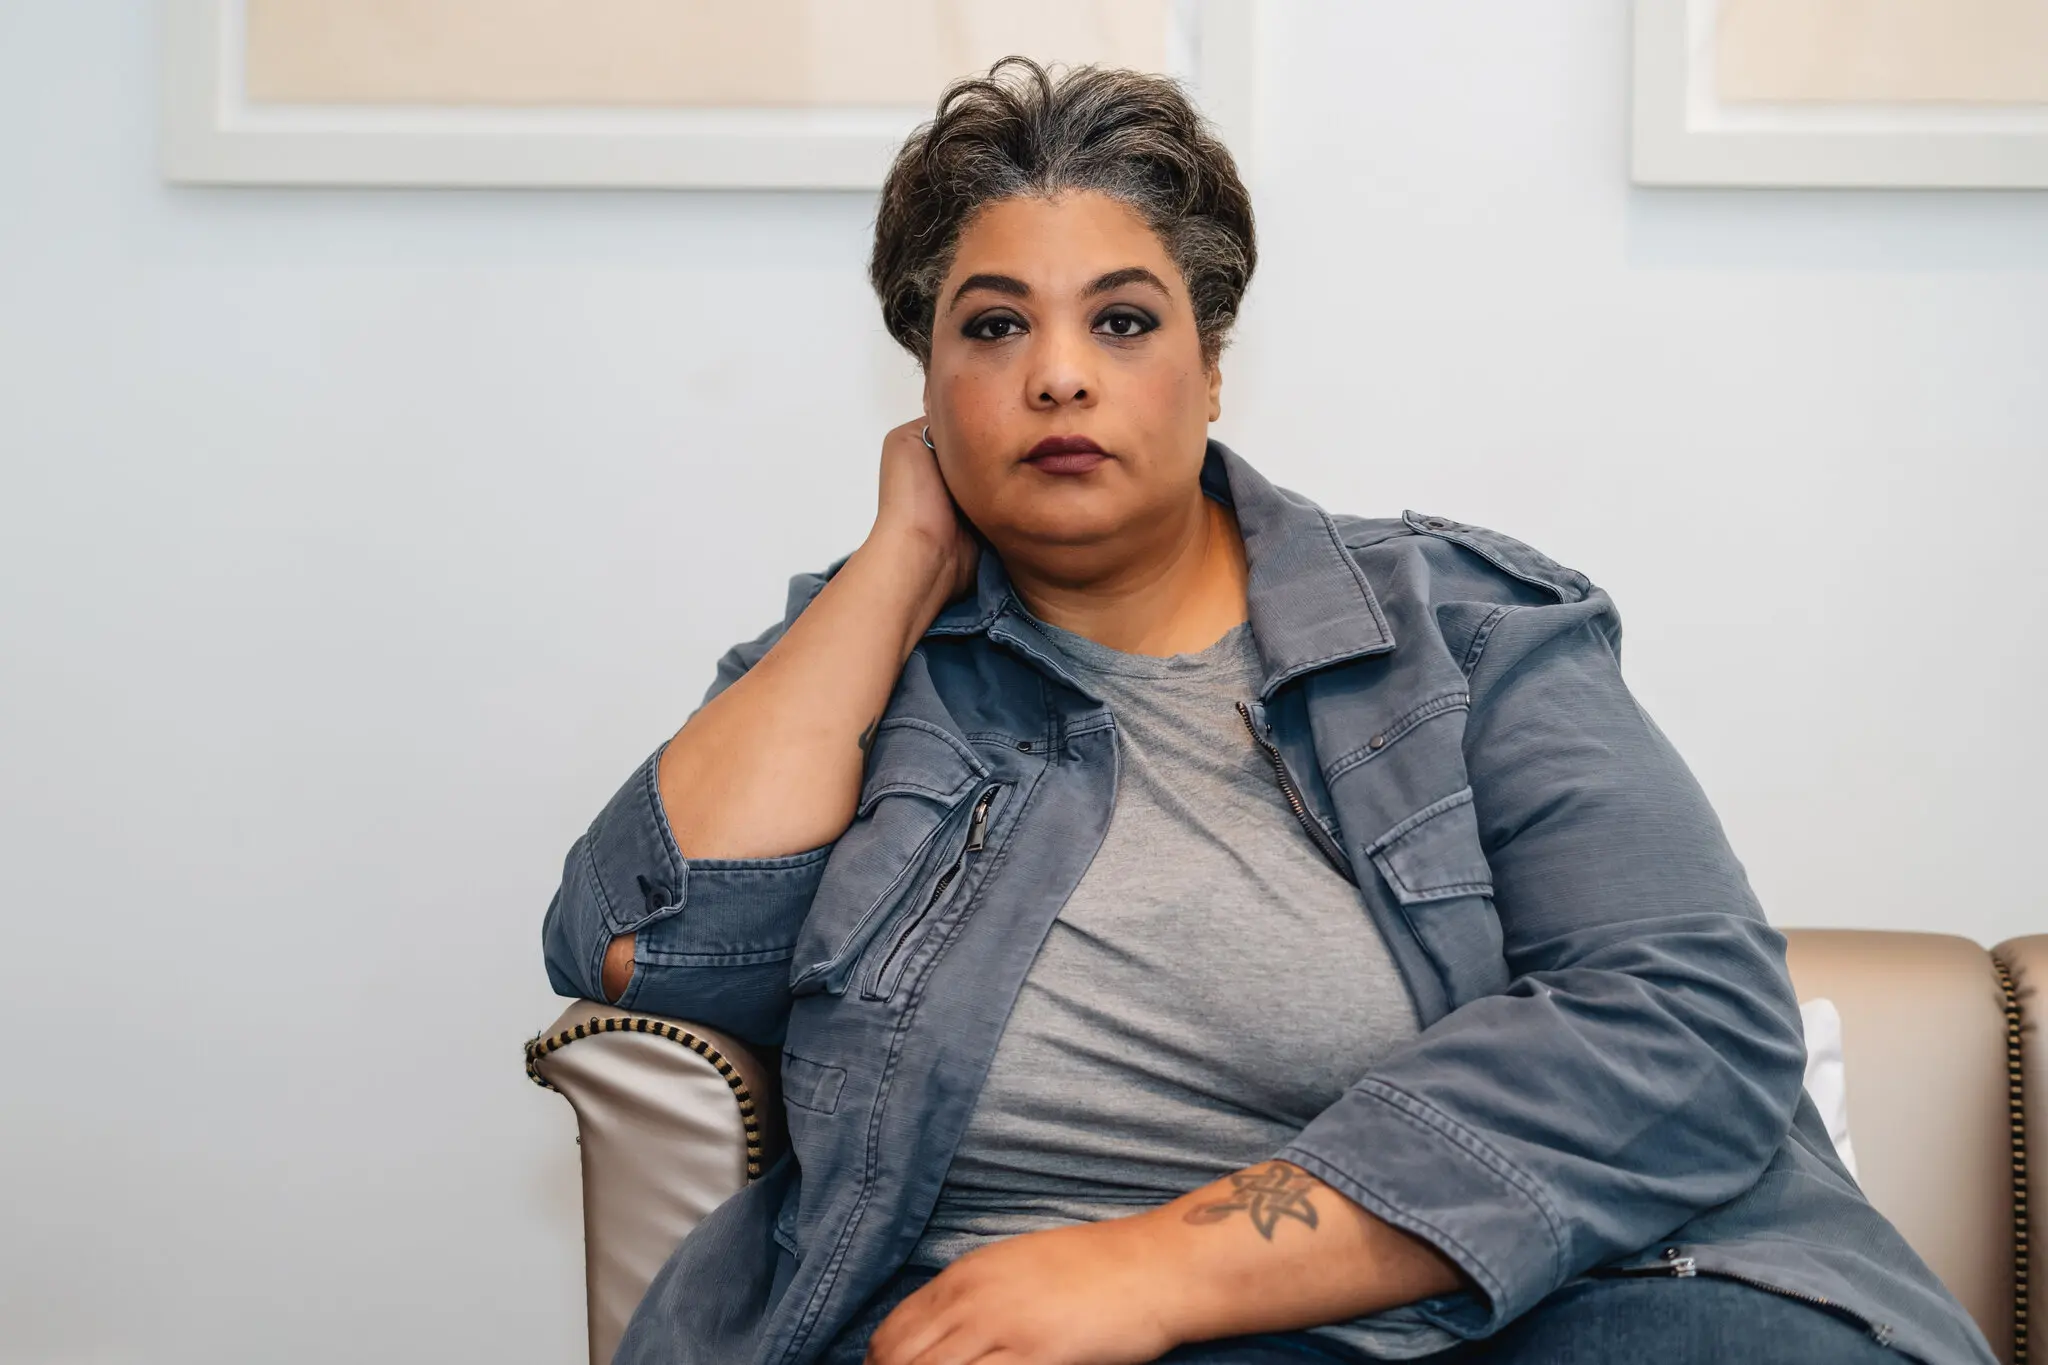 Latest News in Black Art: Roxane Gay Named Board President at Performance Space, Alexis Assam Joins Virginia Museum of Fine Arts as Assistant Curator, Emma Amos Catalog Wins Gold Medal & More